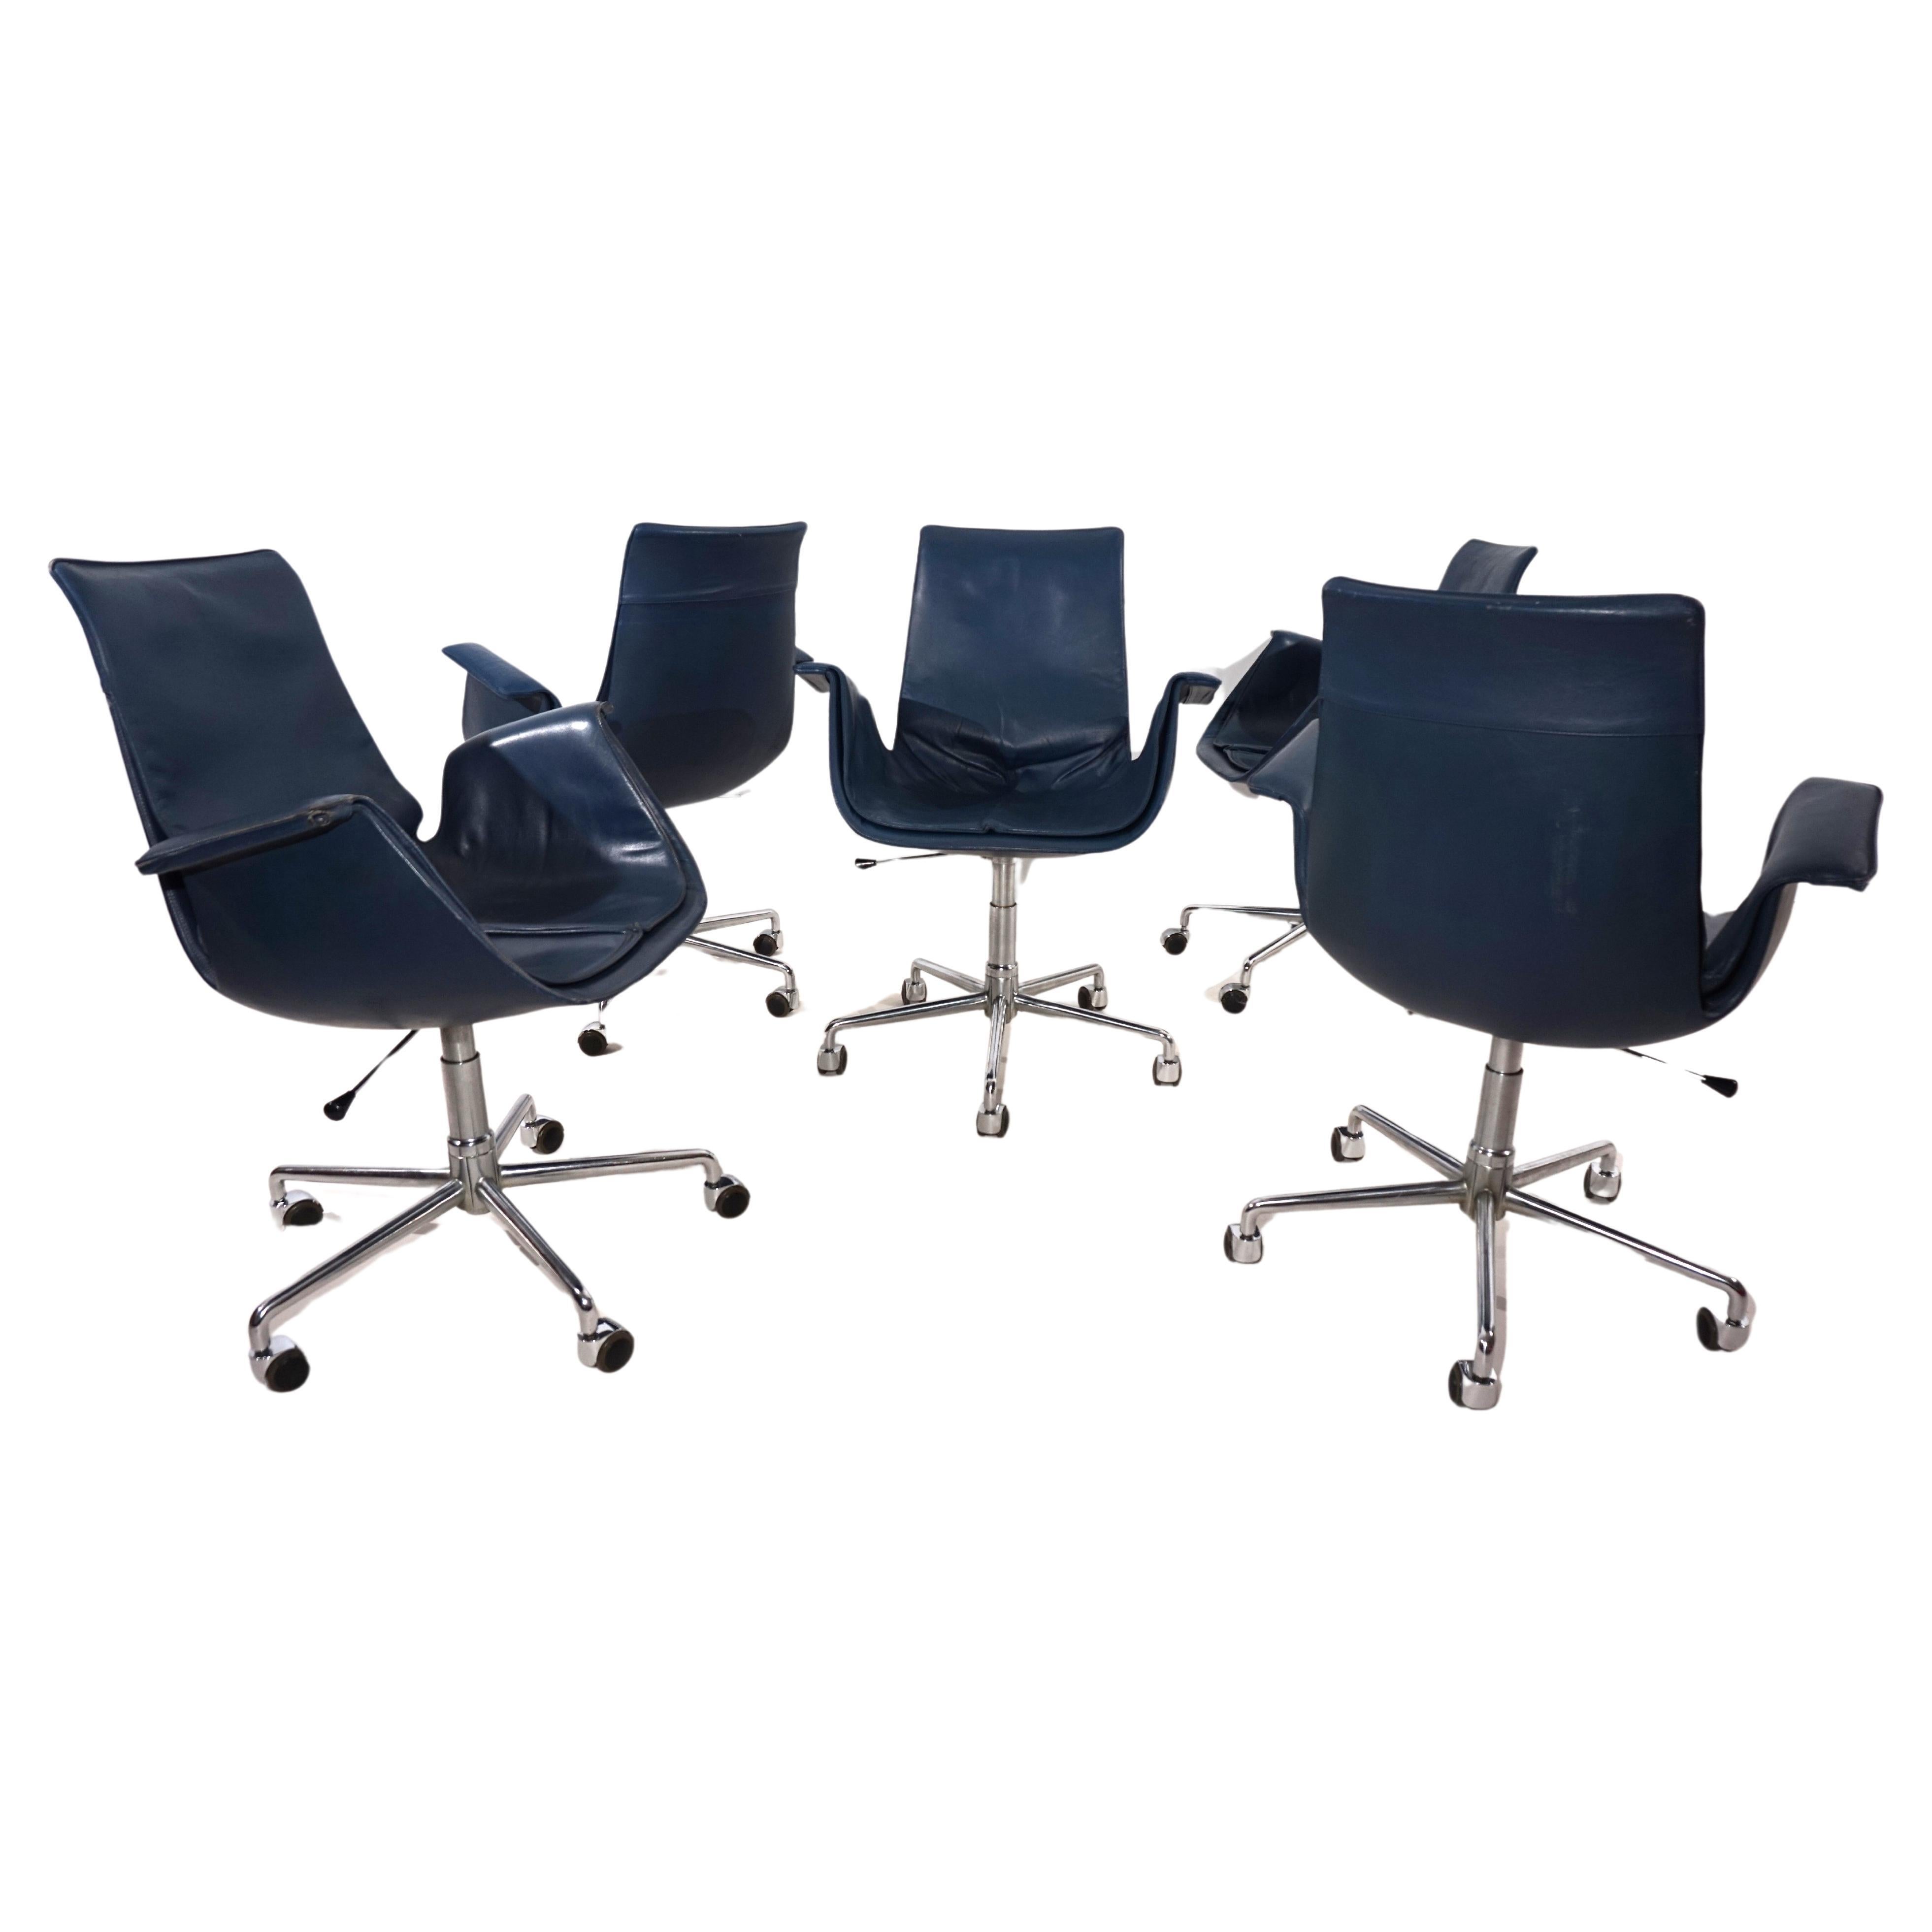 Set of 5 Kill International 6727 leather office chairs by Fabricius & Kastholm